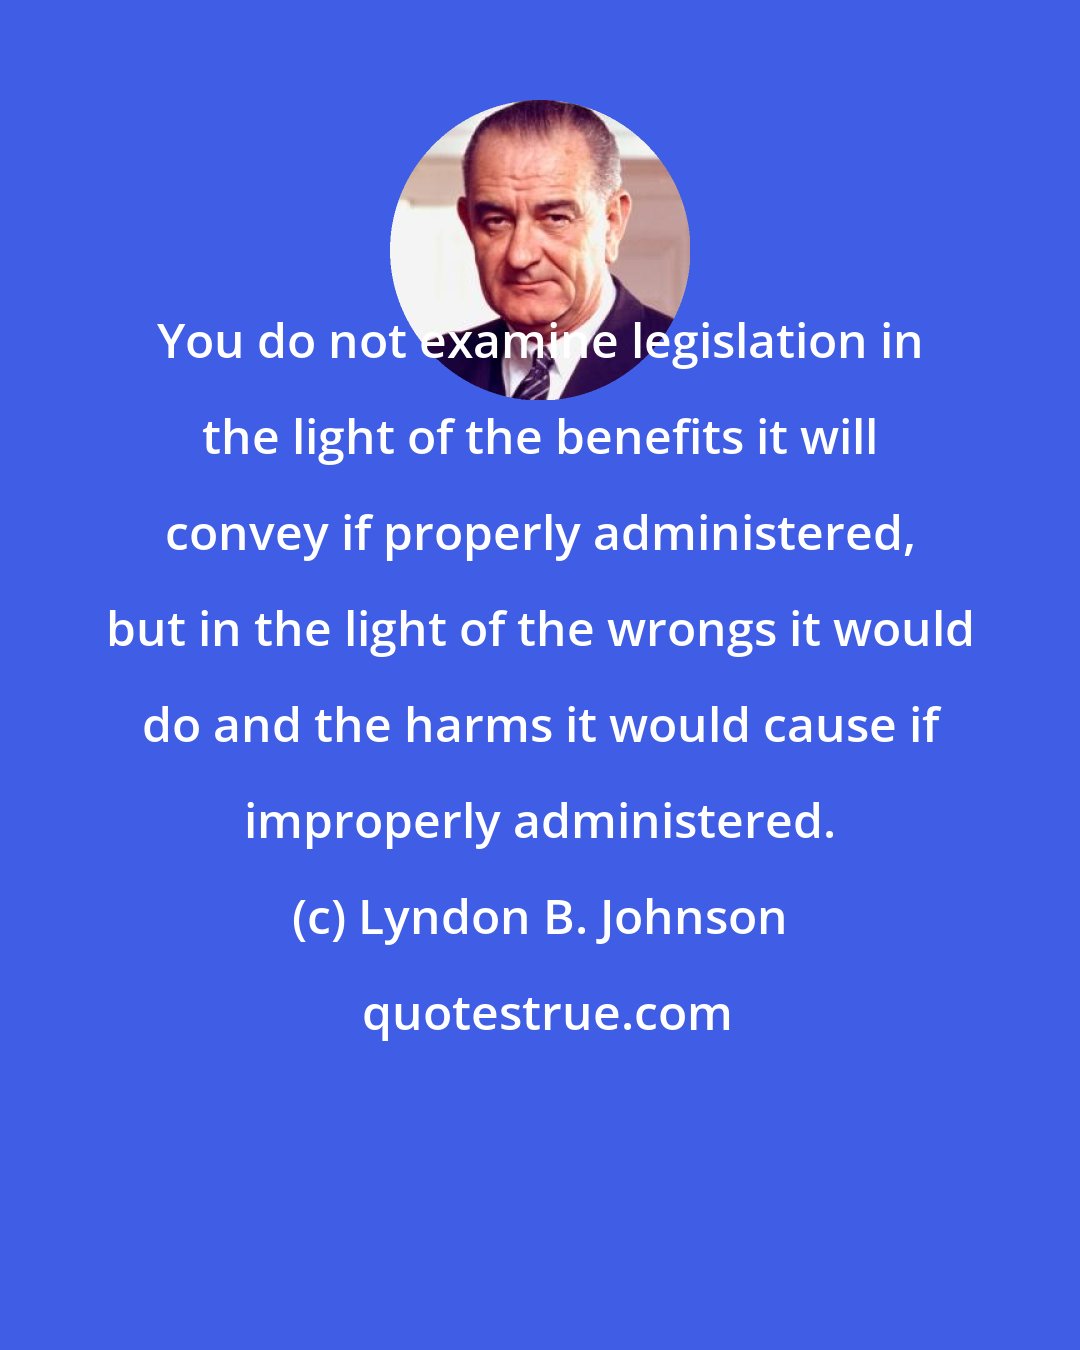 Lyndon B. Johnson: You do not examine legislation in the light of the benefits it will convey if properly administered, but in the light of the wrongs it would do and the harms it would cause if improperly administered.